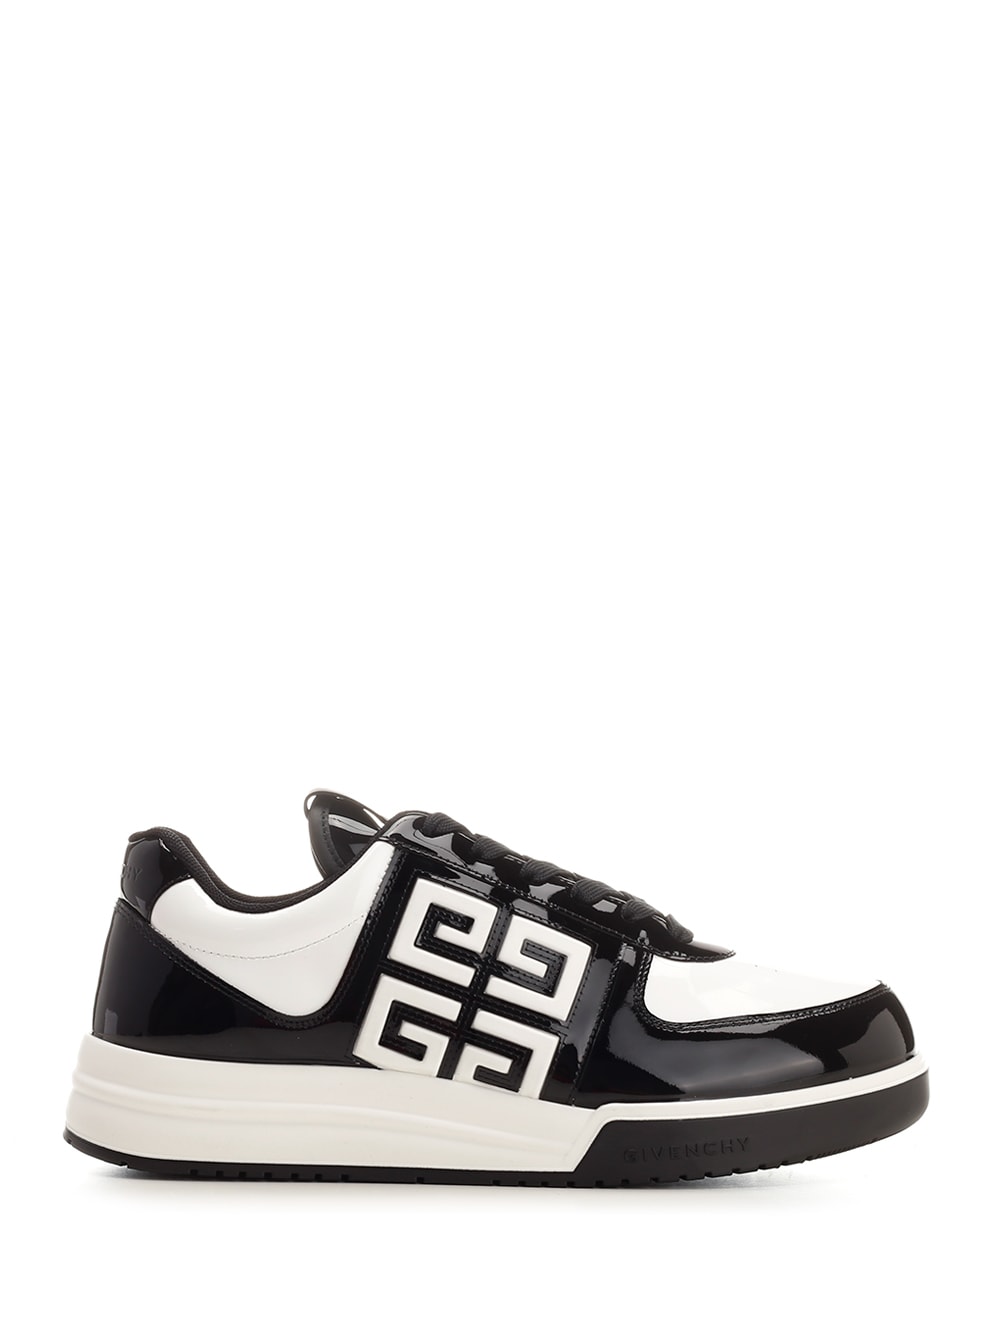 GIVENCHY G4 LOW-TOP trainers